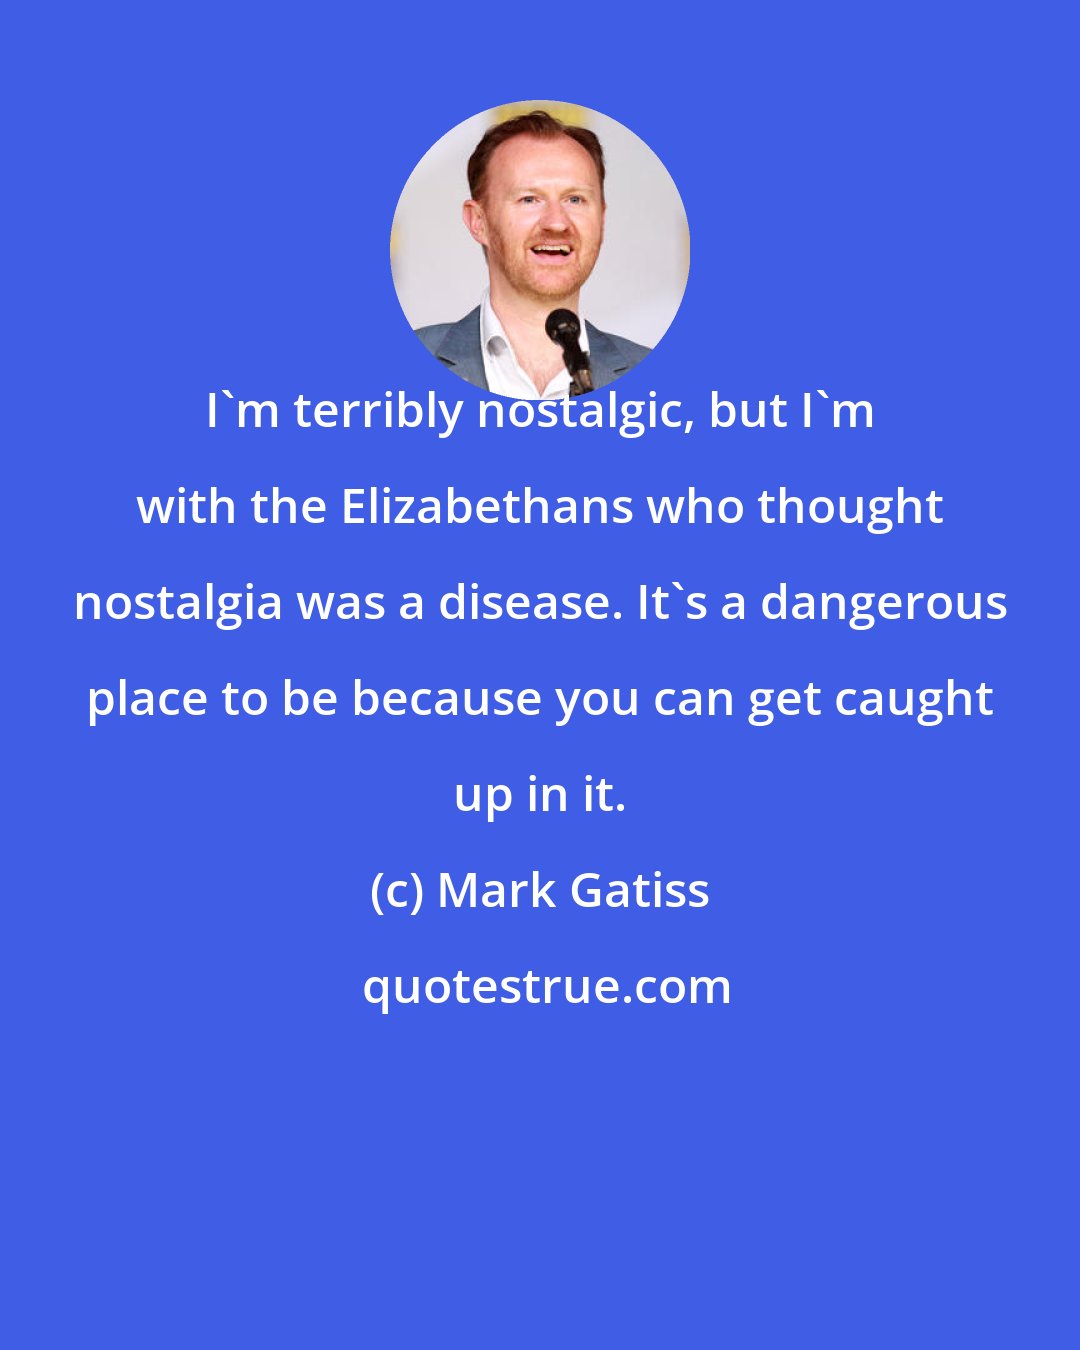 Mark Gatiss: I'm terribly nostalgic, but I'm with the Elizabethans who thought nostalgia was a disease. It's a dangerous place to be because you can get caught up in it.